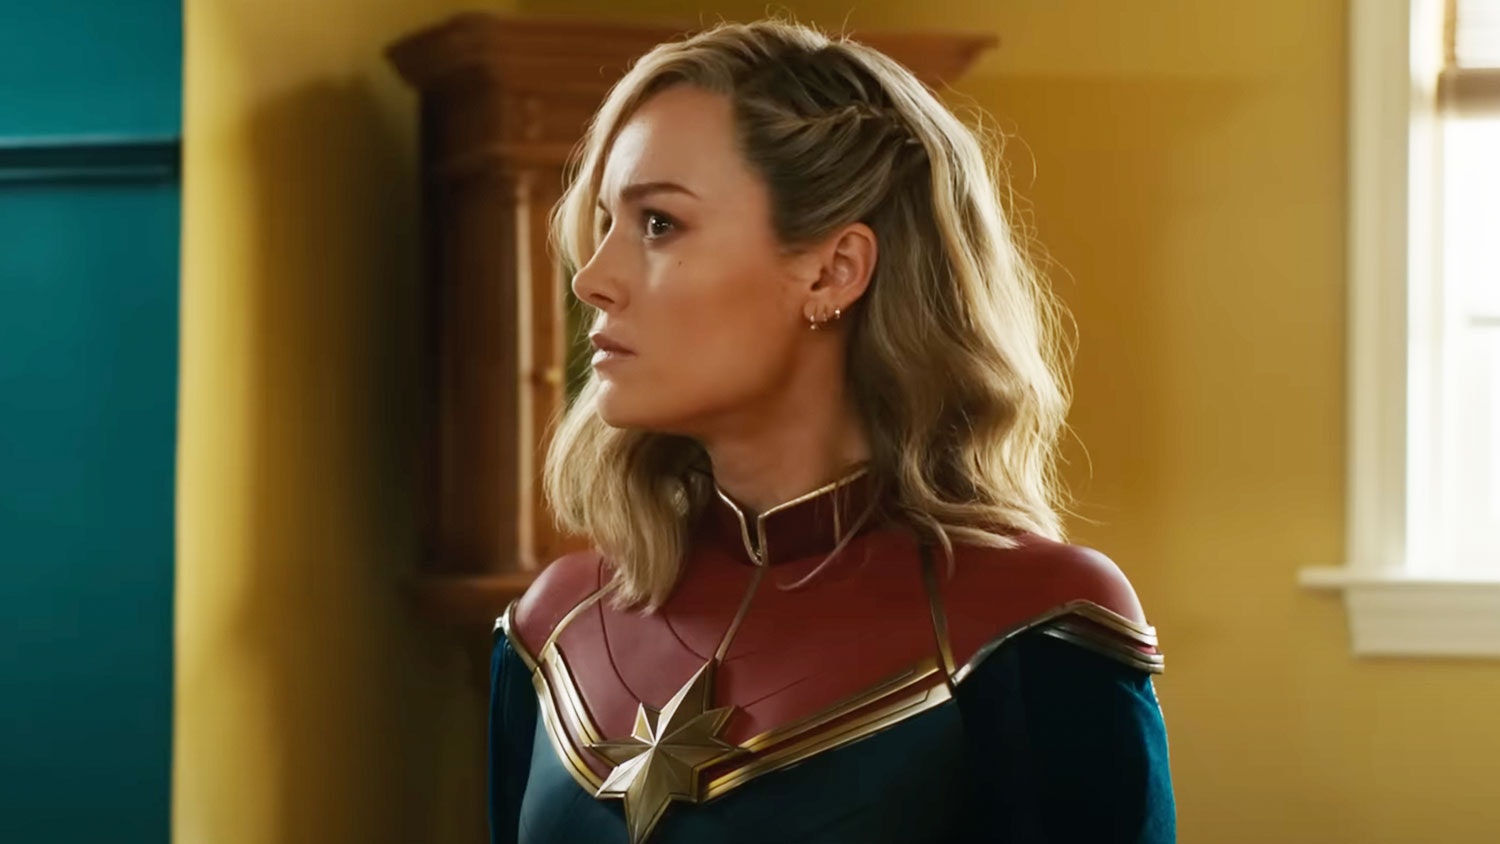 The Marvels teaser trailer: Brie Larson, Iman Vellani and Teyonah Parris  team up. Watch